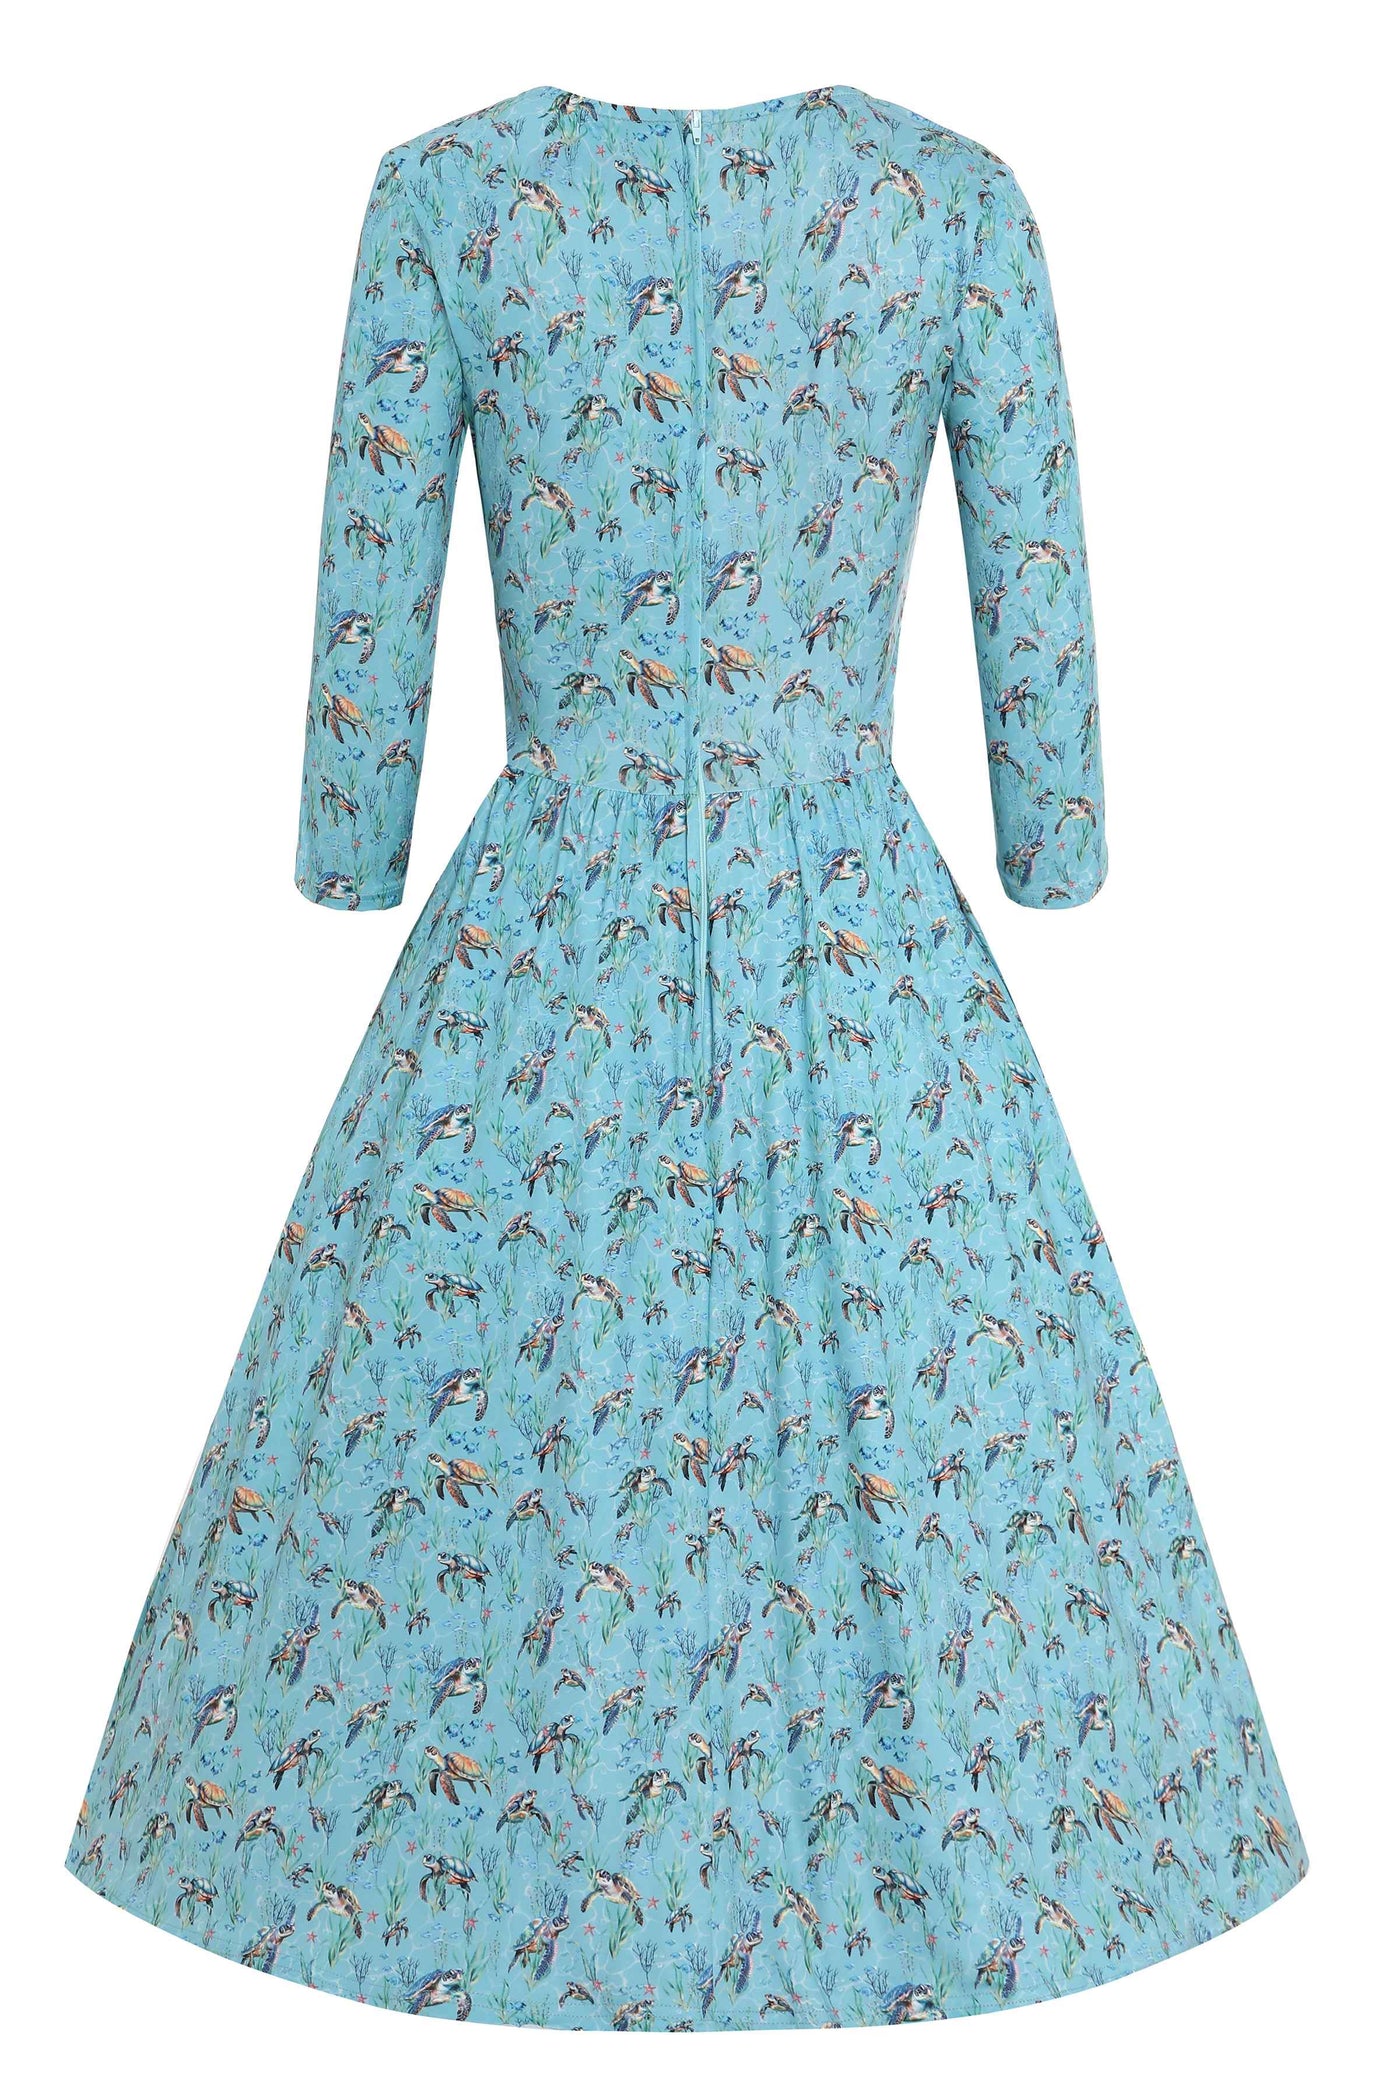 Back view of Underwater Turtle Print Flared Dress in Light Blue